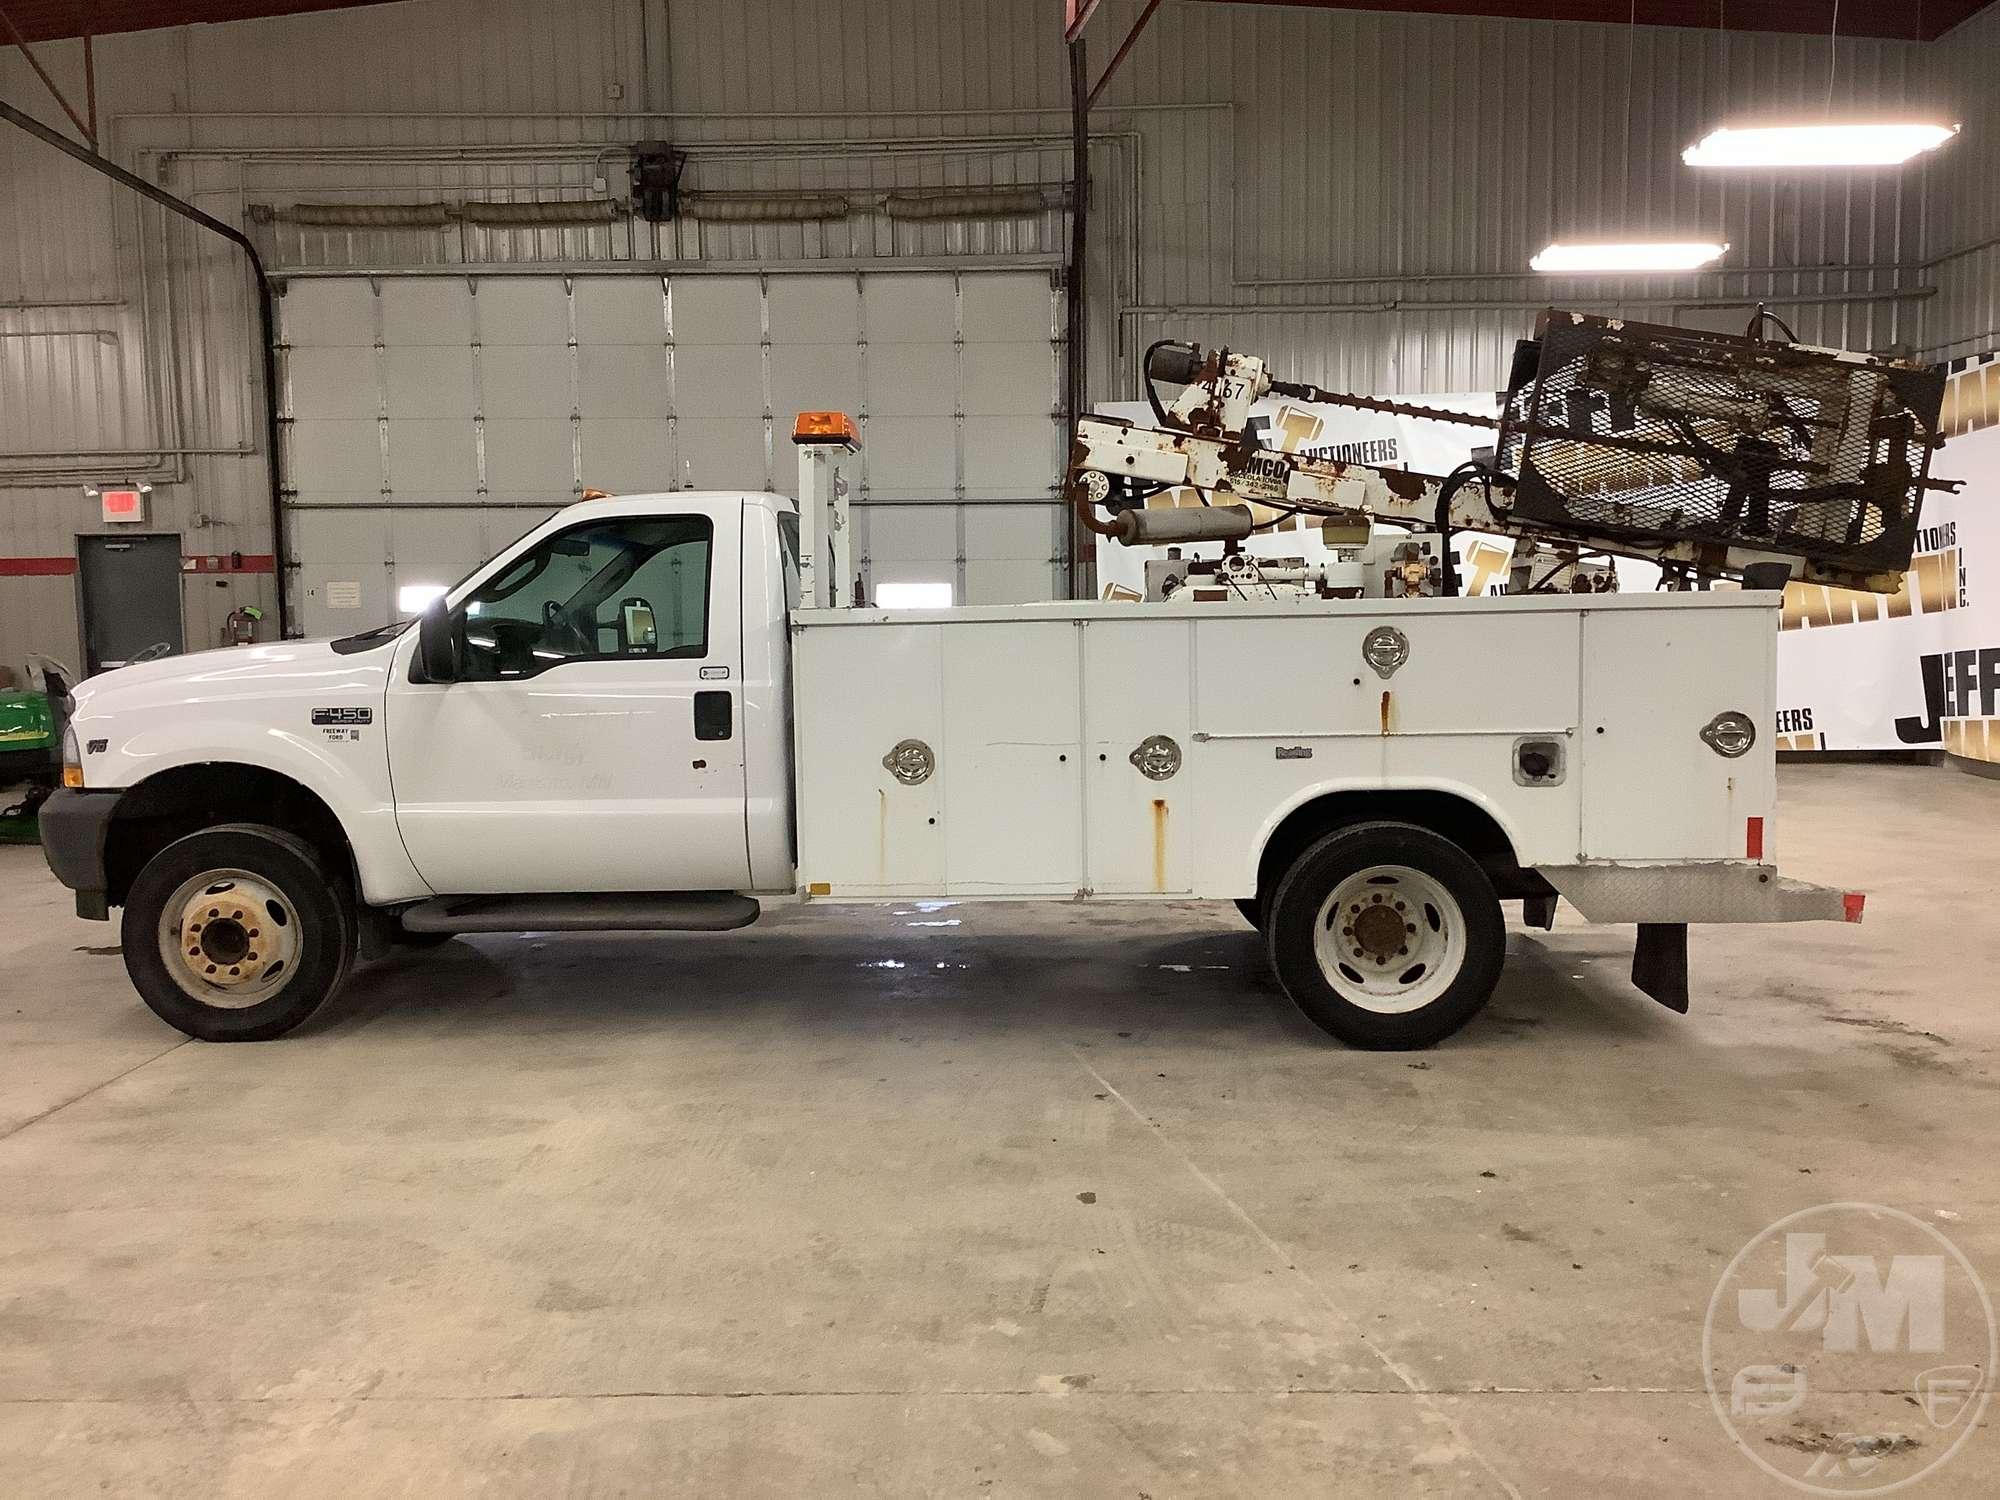 2004 FORD F-450 S/A UTILITY TRUCK VIN: 1FDXF46S84EE07680